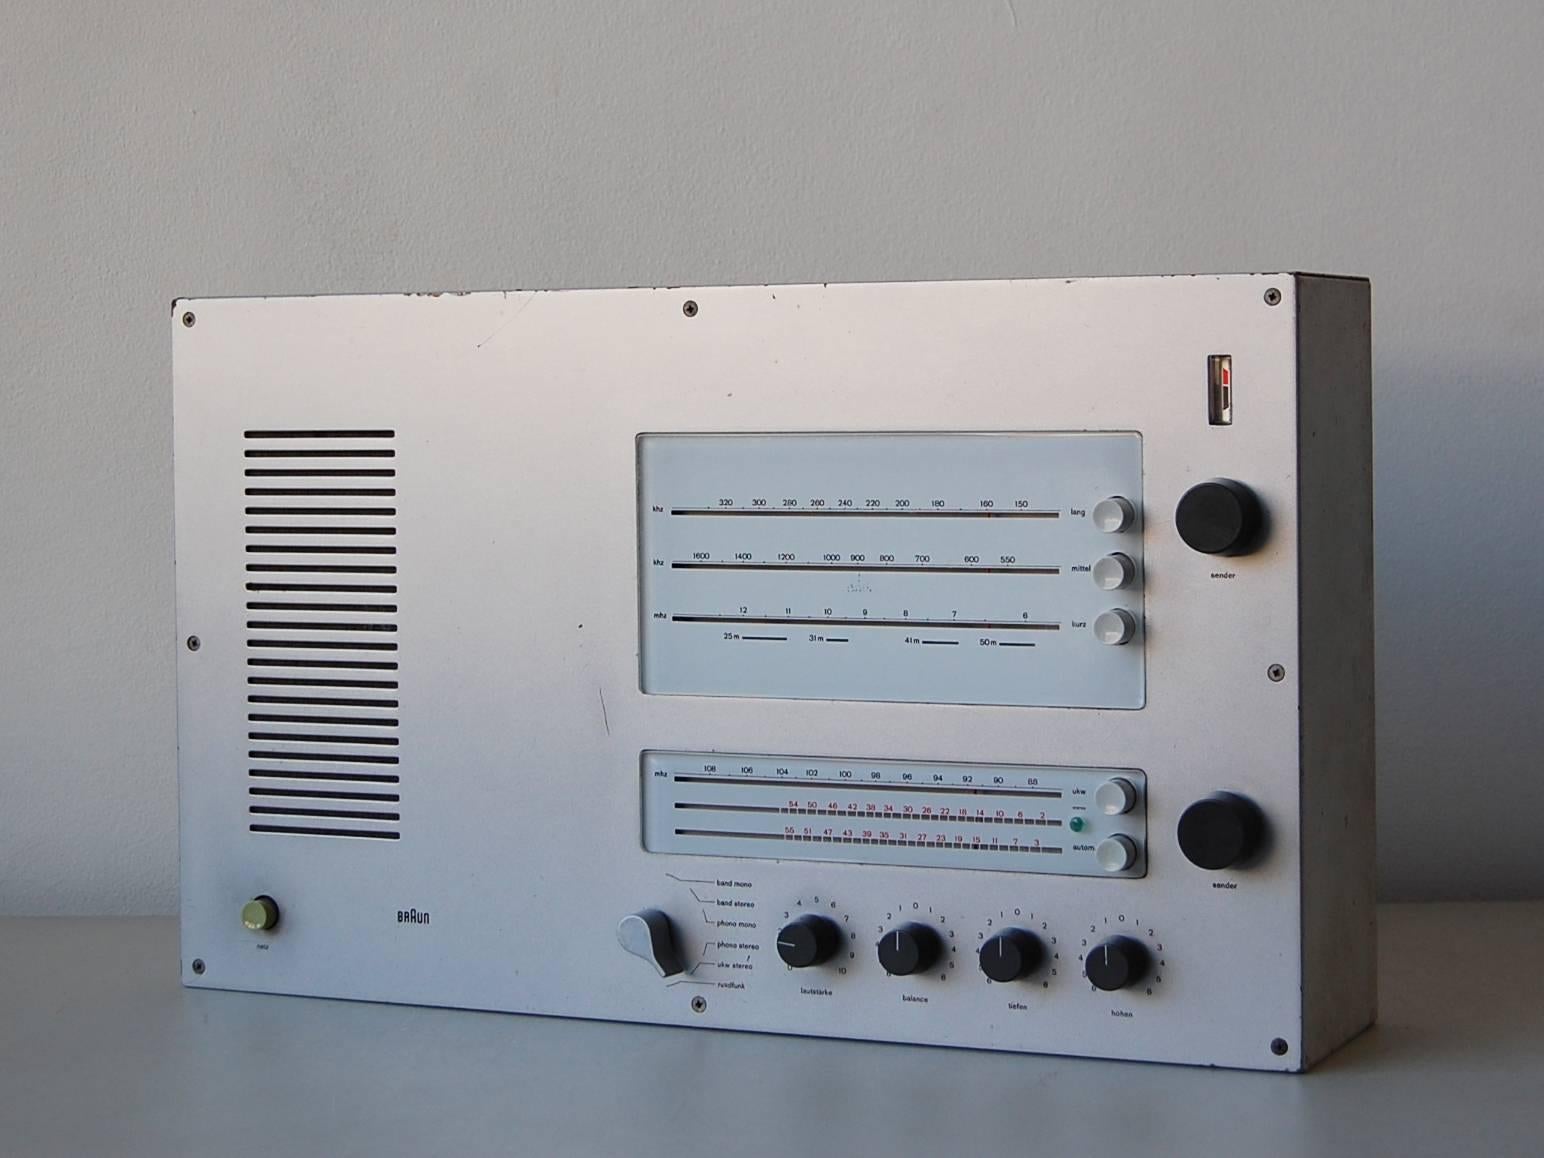 Dieter Rams
Braun AG, Germany

TS45 Steuergerät, Receiver (amplifier/tuner), 1964

White and aluminium colour metal, grey and graphite switches.

Serial number 11180

Dimensions: 47.5x28x10cm
Weight: 10.5 Kg

This superb example of the